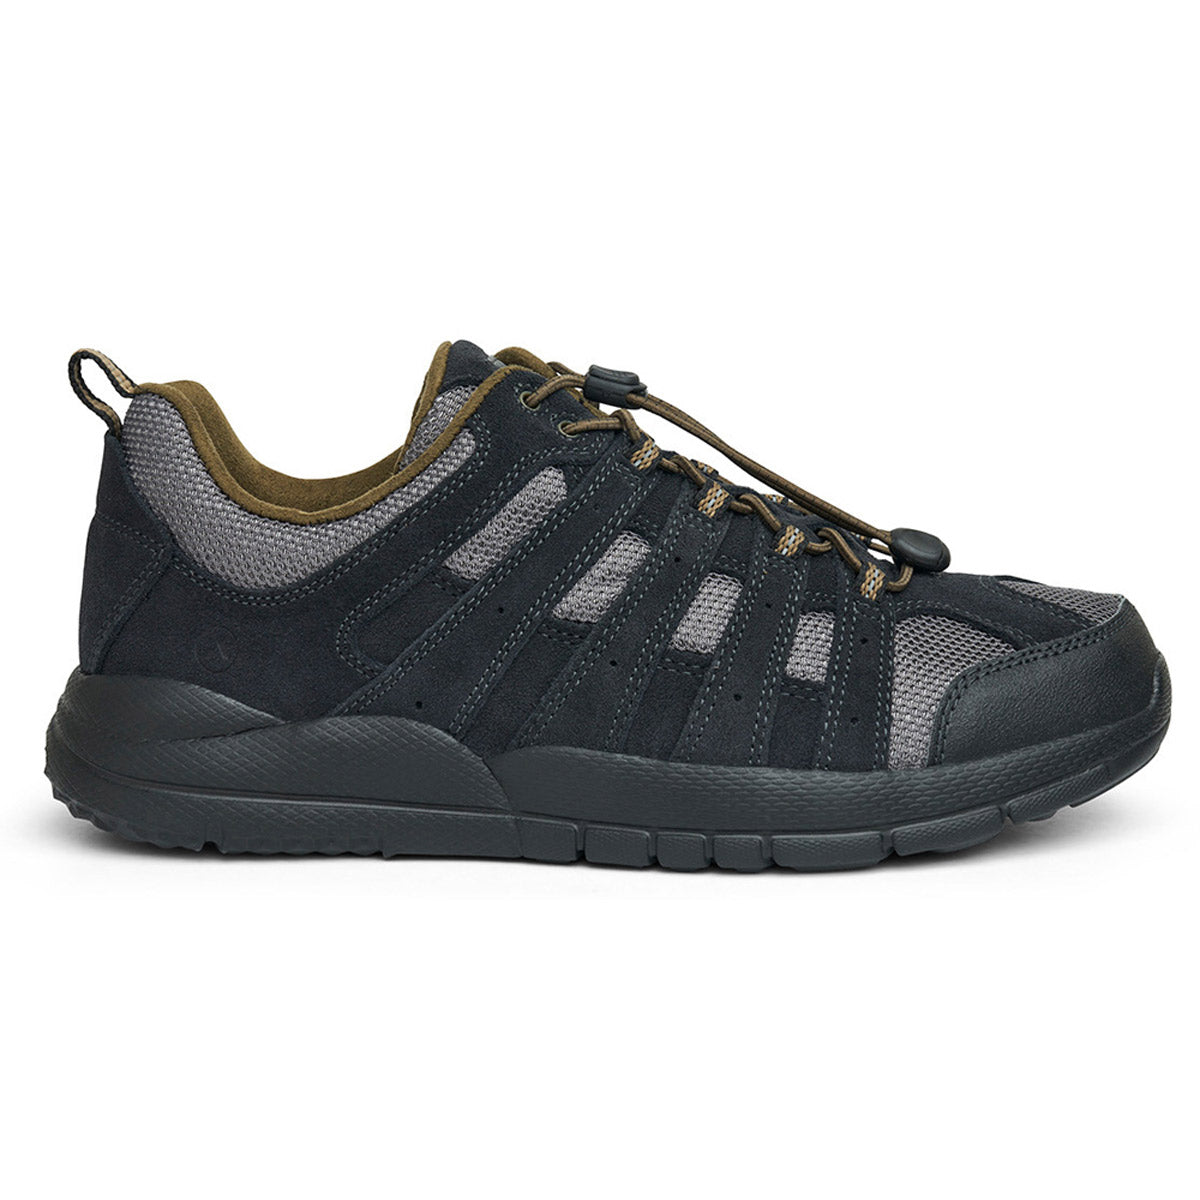 Side view of a single black and gray Anodyne Trail Walker hiking shoe with mesh inserts and a thick sole.